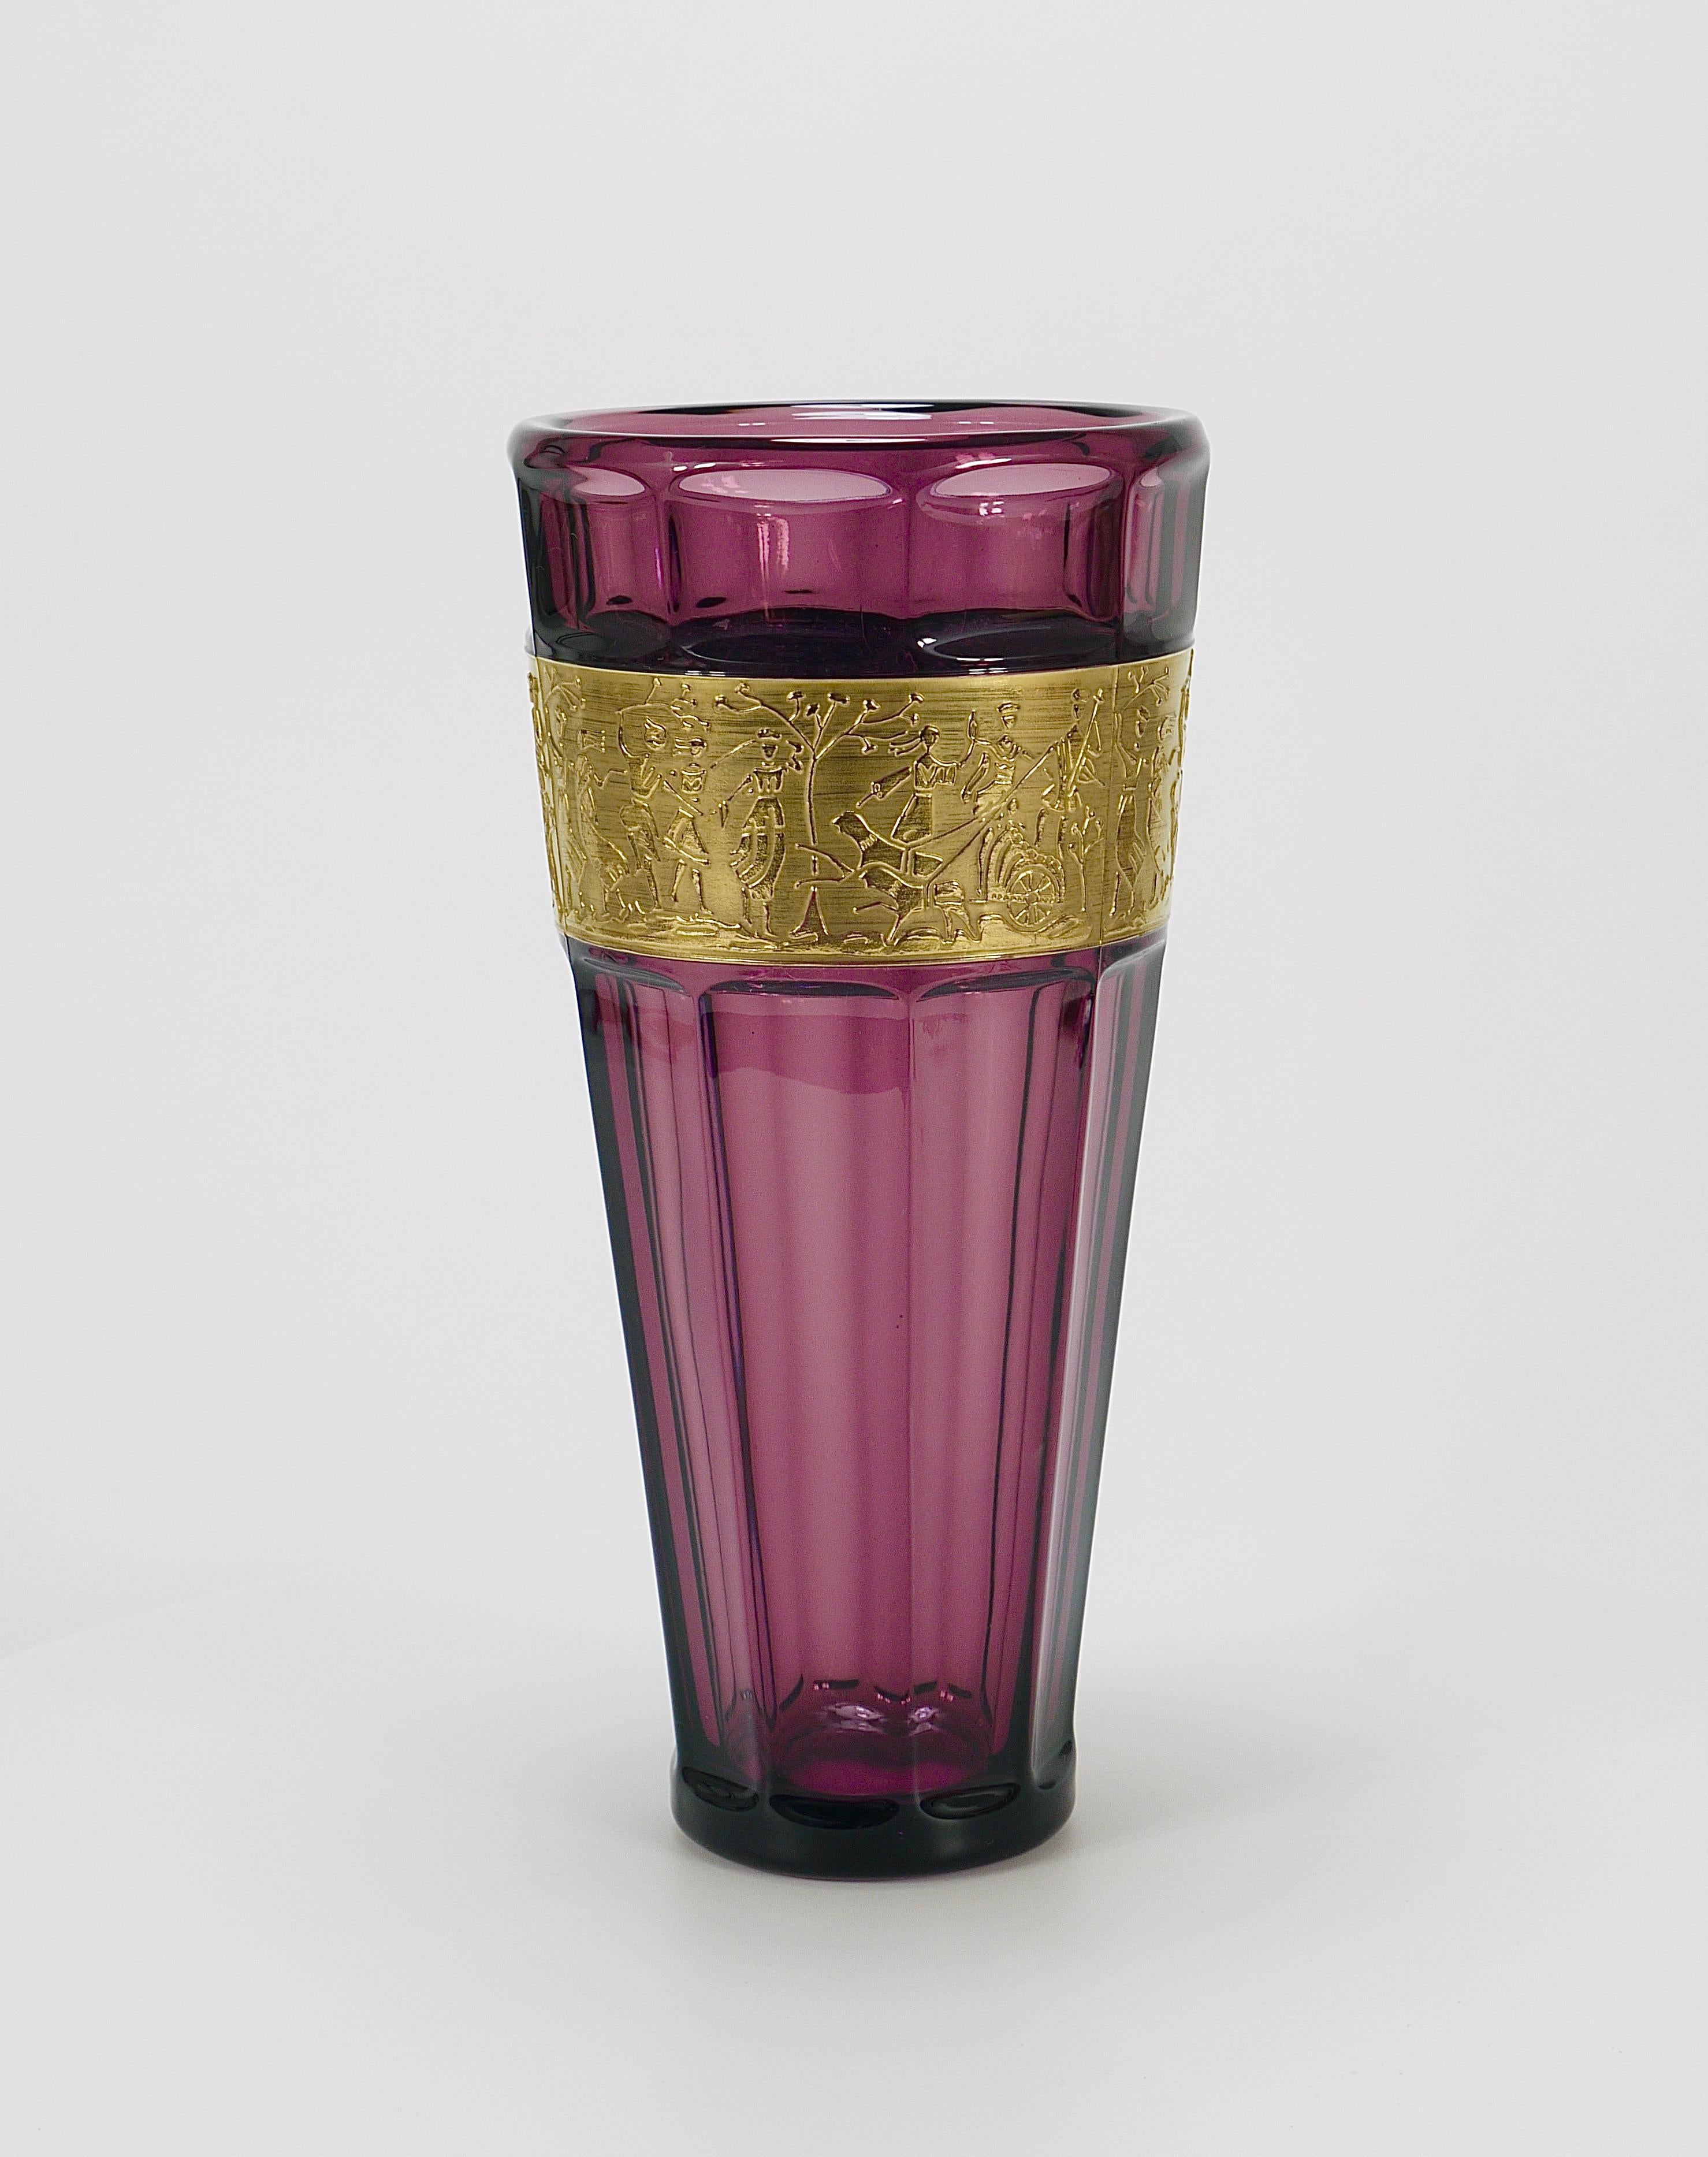 Ludwig Moser Art Deco Amethyst Crystal Glass Vase, Fipop Series, Karlsbad, 1920s In Good Condition For Sale In Vienna, AT